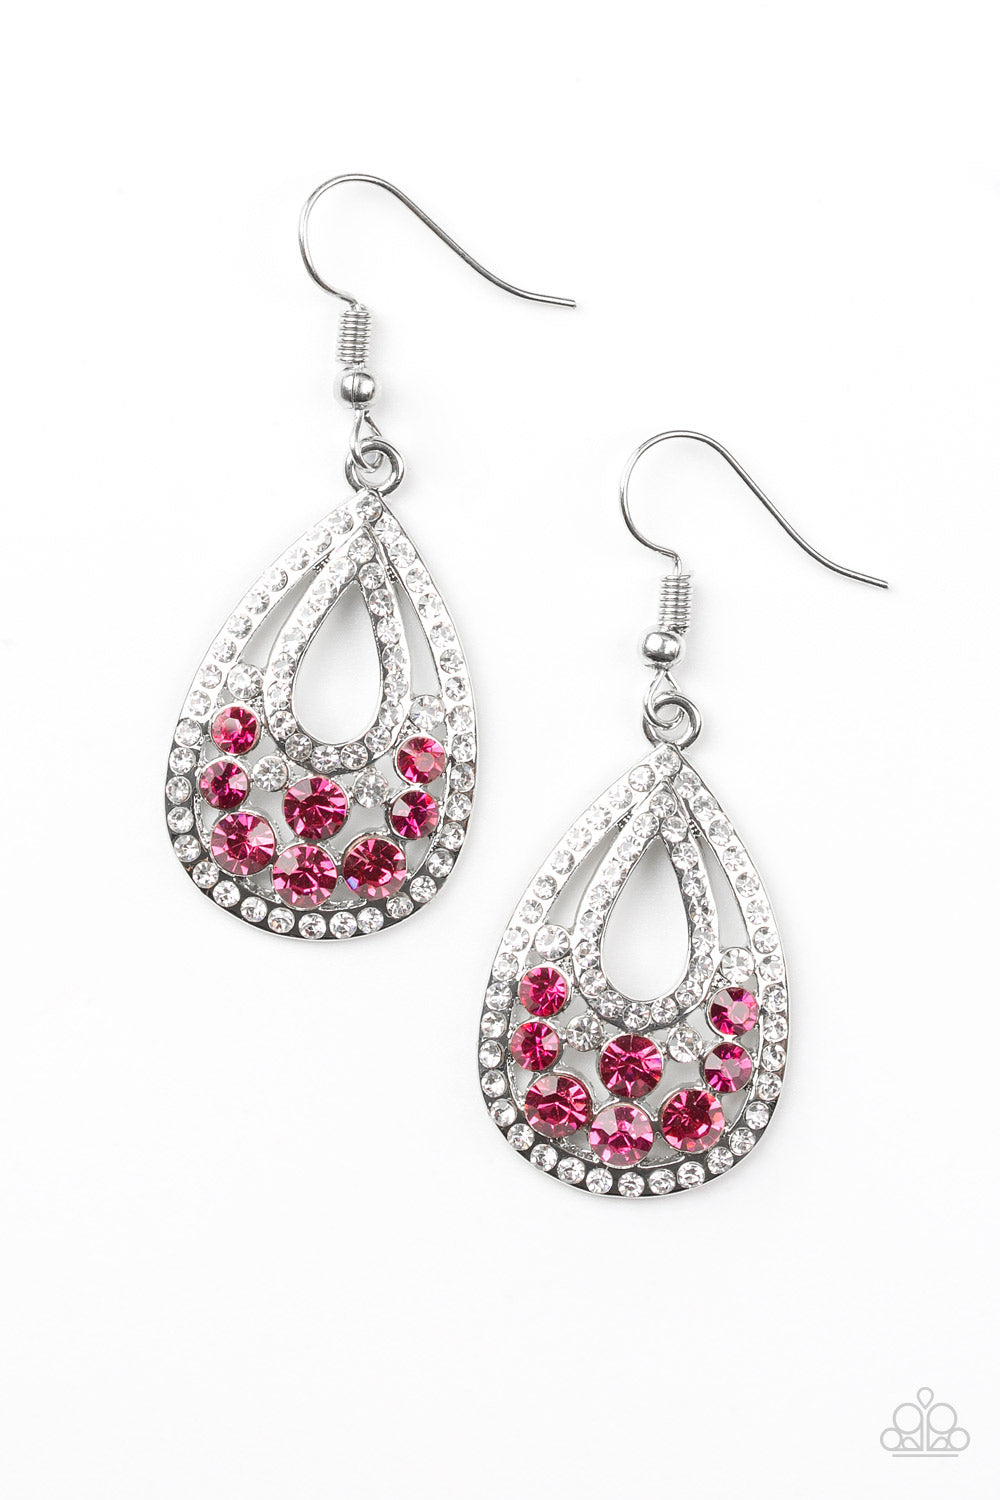 five-dollar-jewelry-sparkling-stardom-pink-earrings-paparazzi-accessories